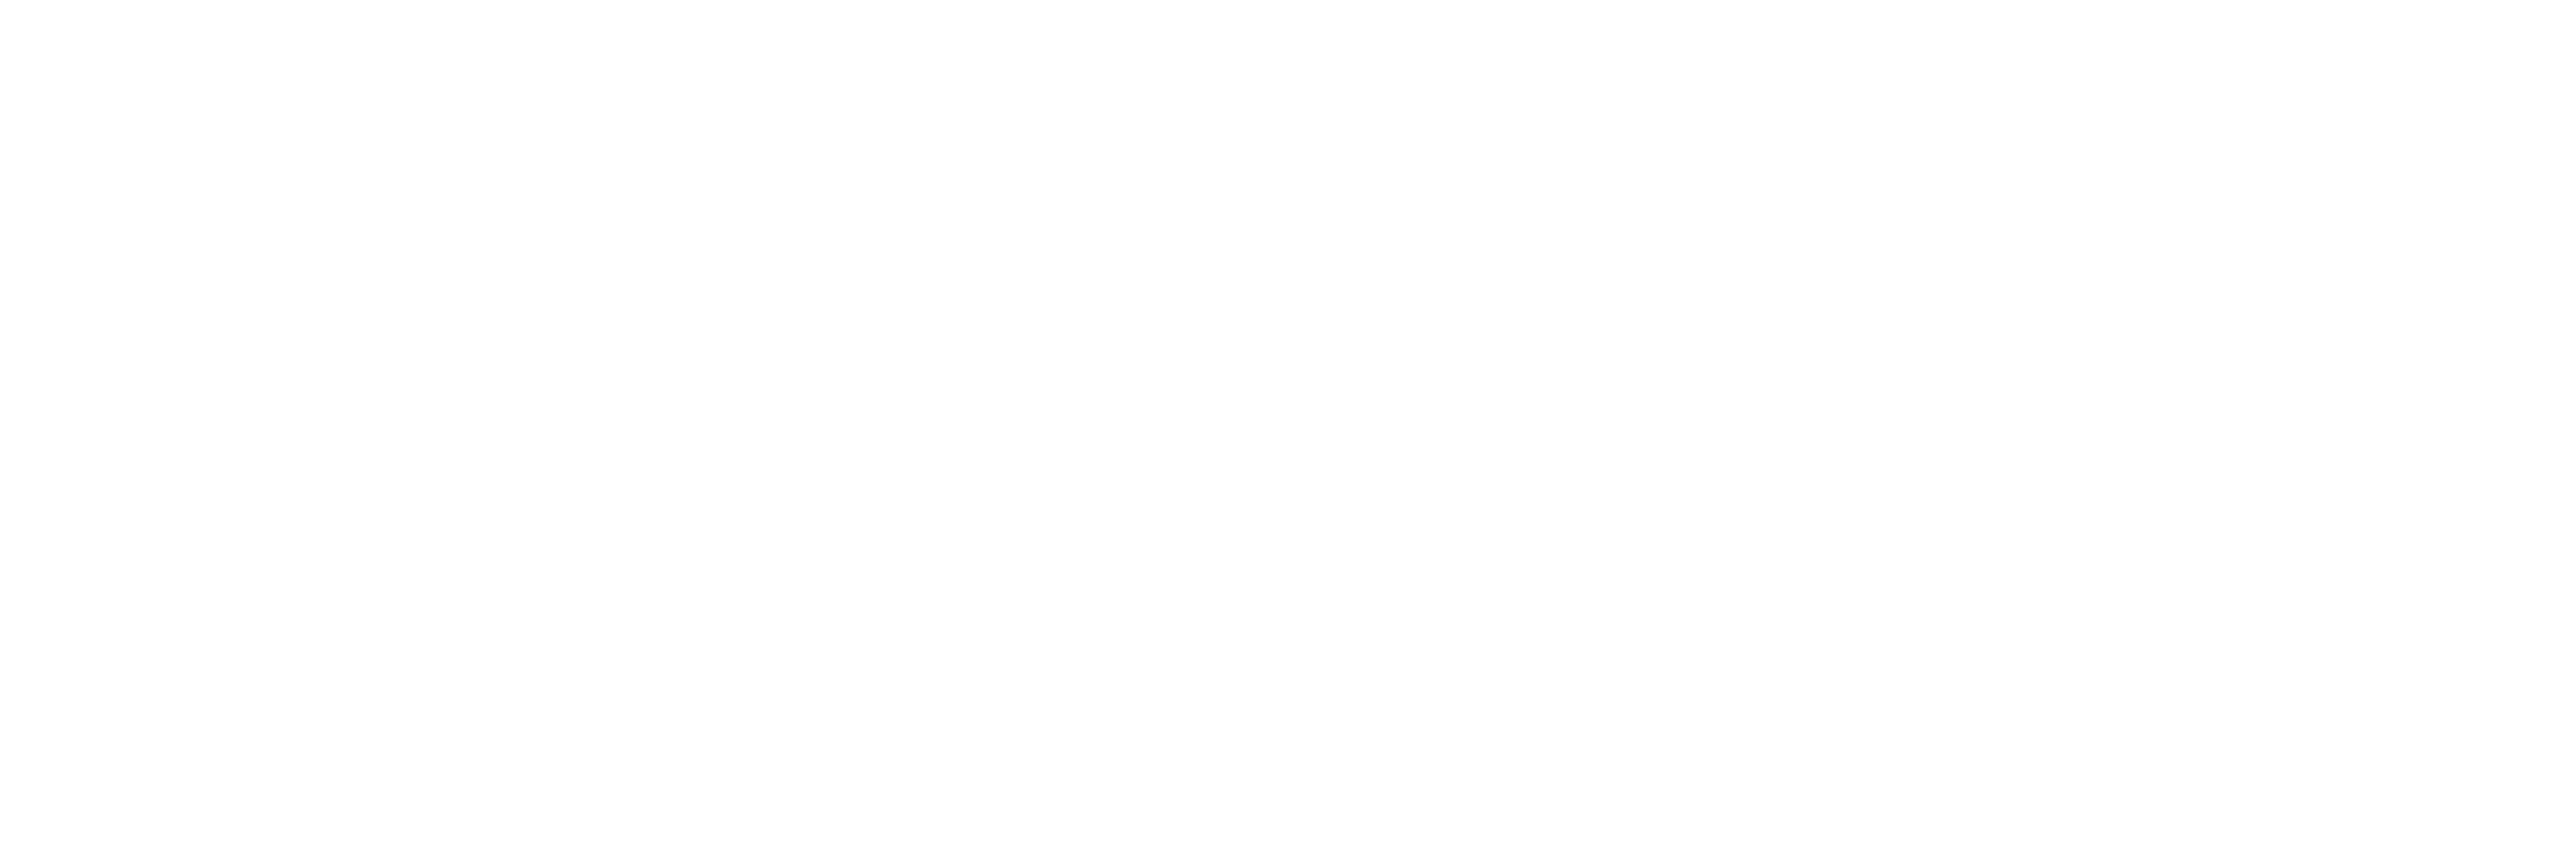 Lucy fashion footer logo